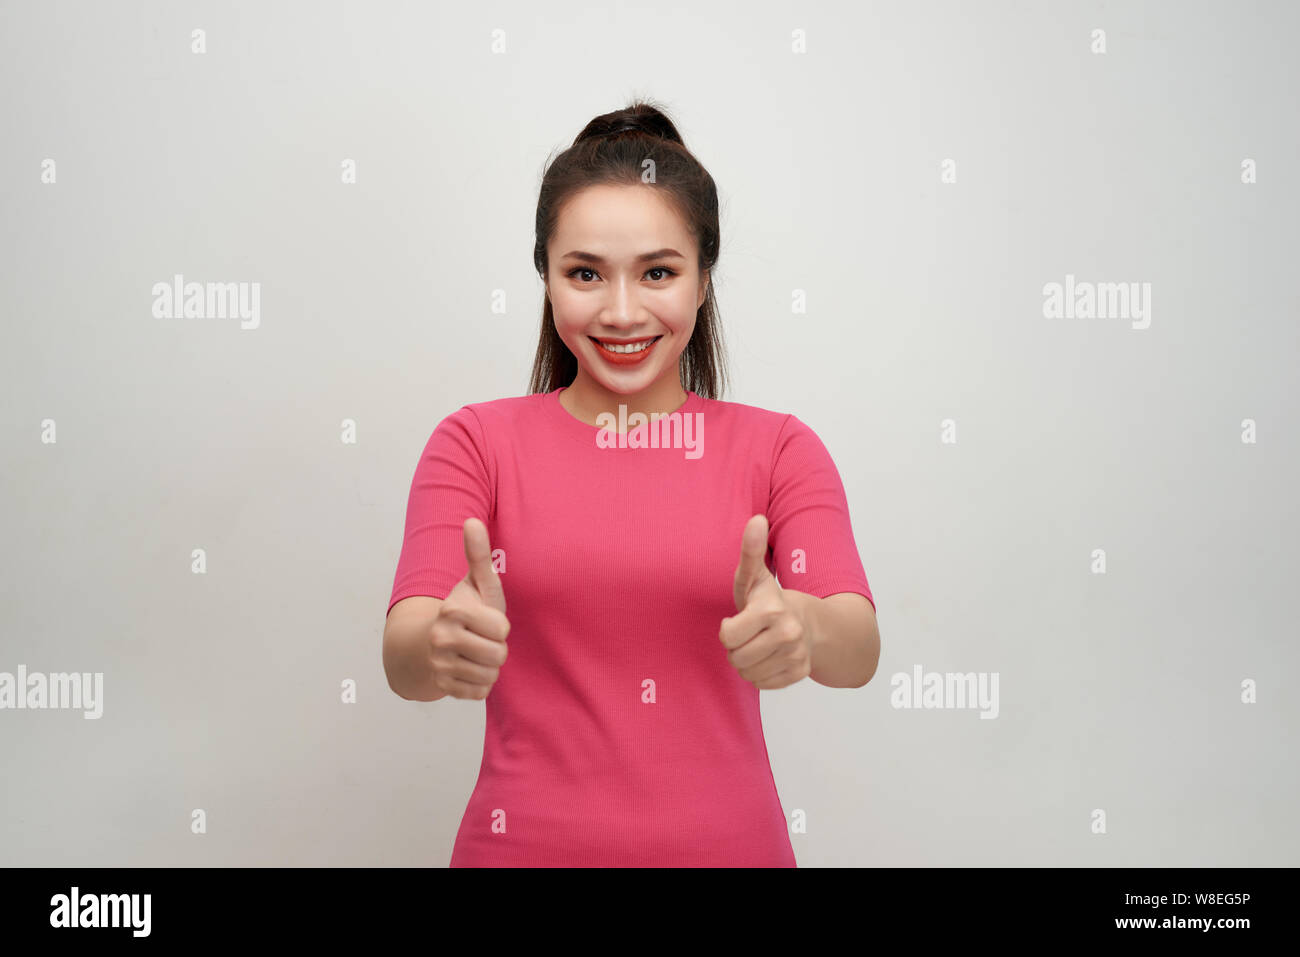 Enthusiastic motivated attractive young woman giving a thumbs up gesture of approval and success with a beaming smile Stock Photo